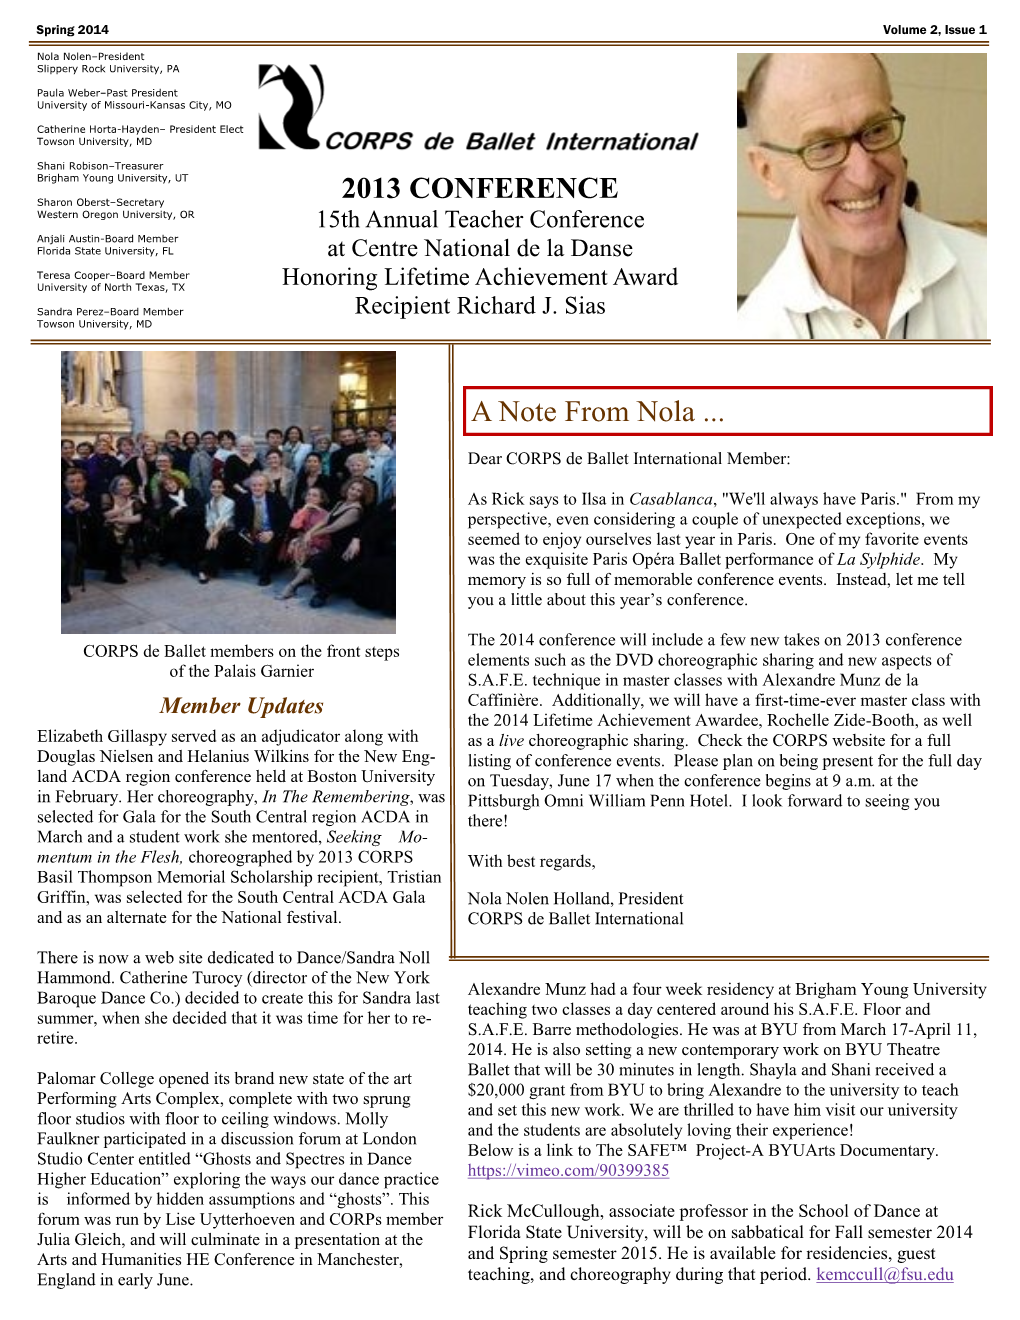 A Note from Nola ... 2013 CONFERENCE